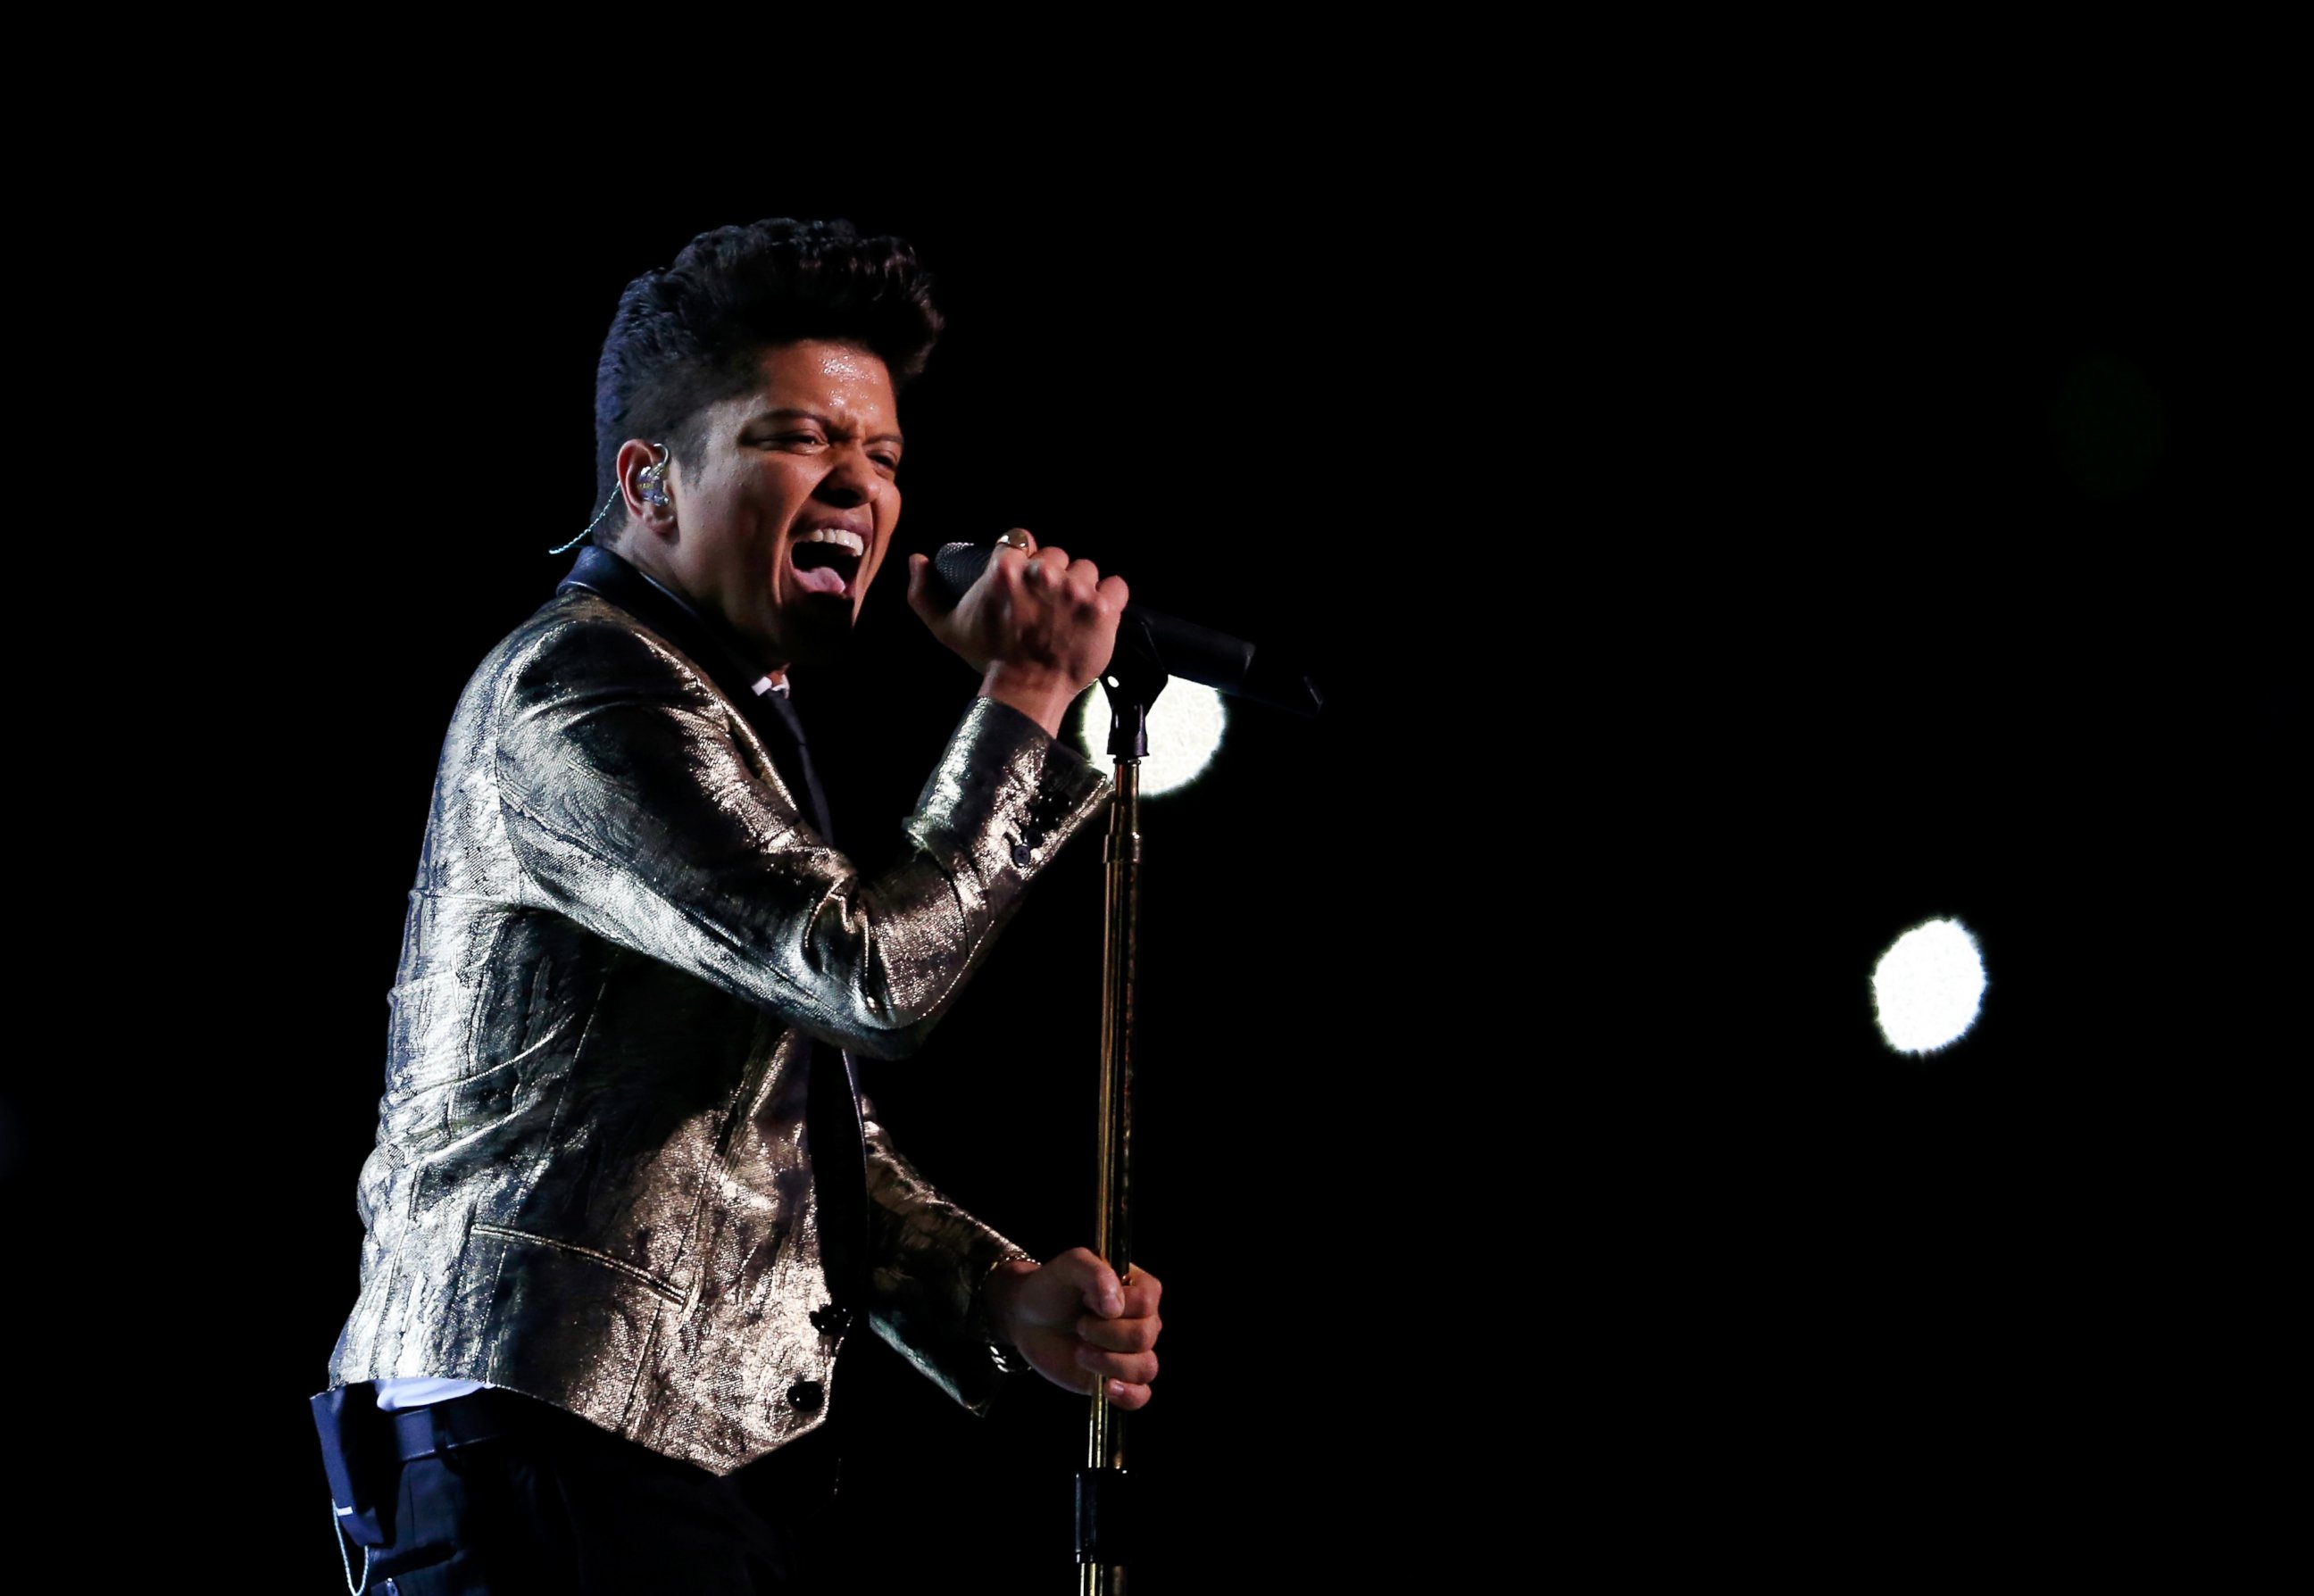 PHOTO: Bruno Mars performs during the Pepsi Super Bowl XLVIII Halftime Show at MetLife Stadium on Feb. 2, 2014 in East Rutherford, New Jersey.